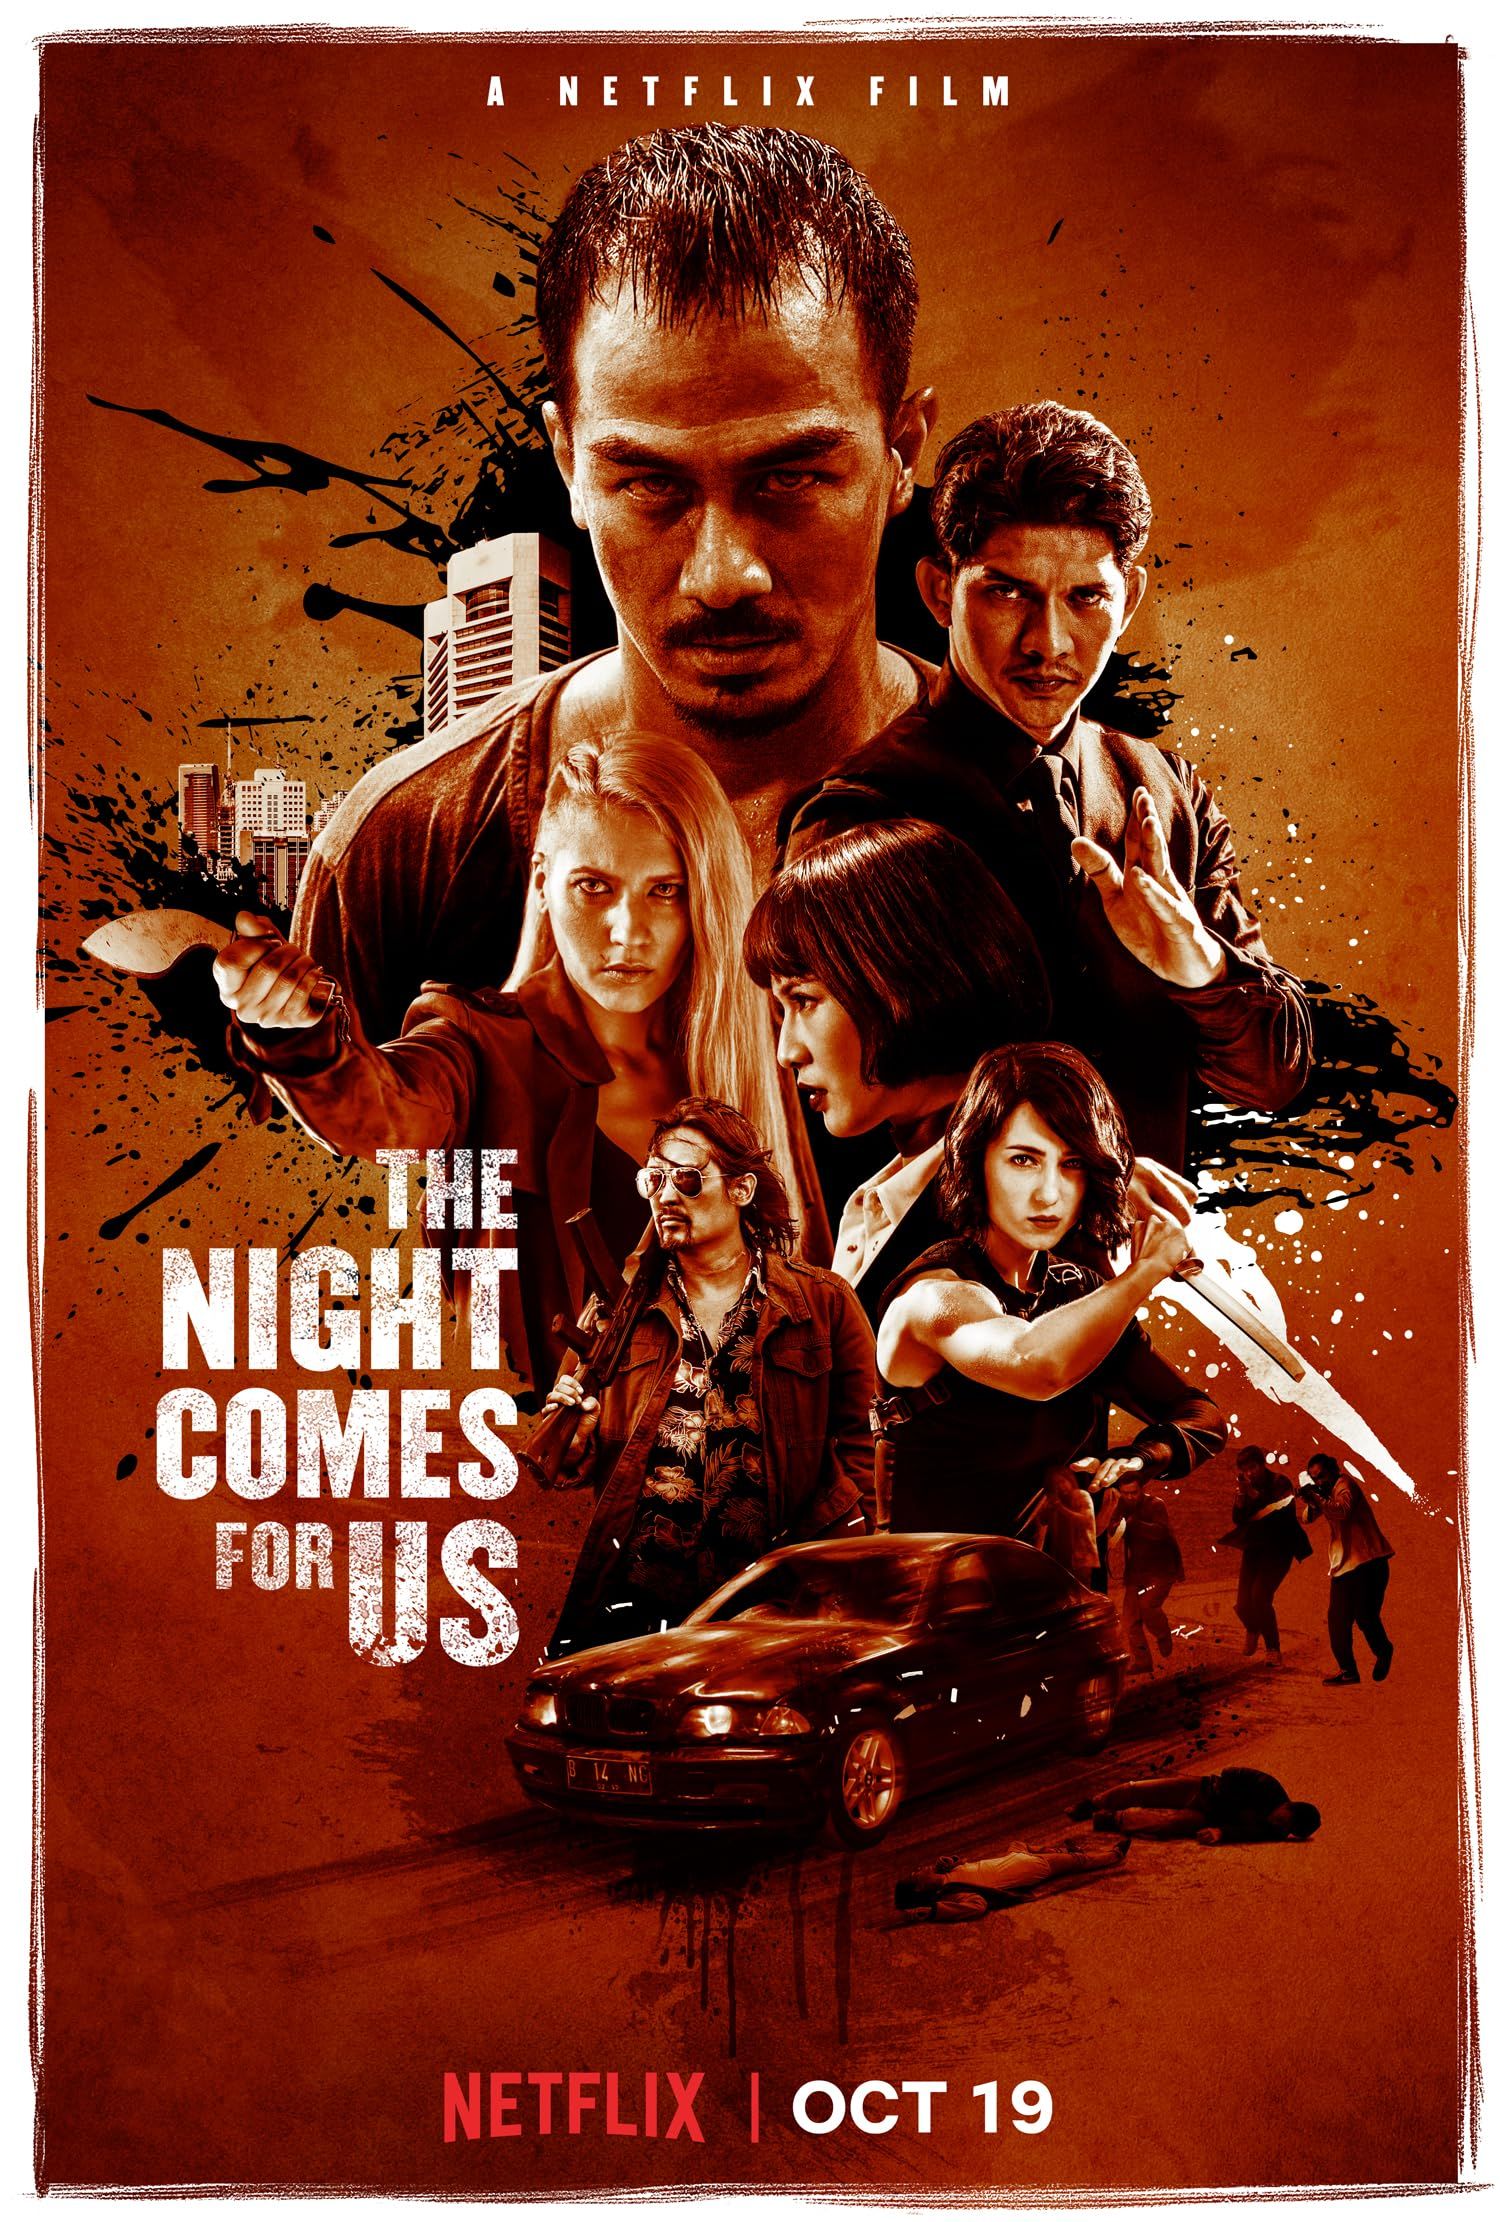 The Night Comes for Us (2018) Hindi Dubbed ORG BluRay Full Movie 720p 480p Movie download